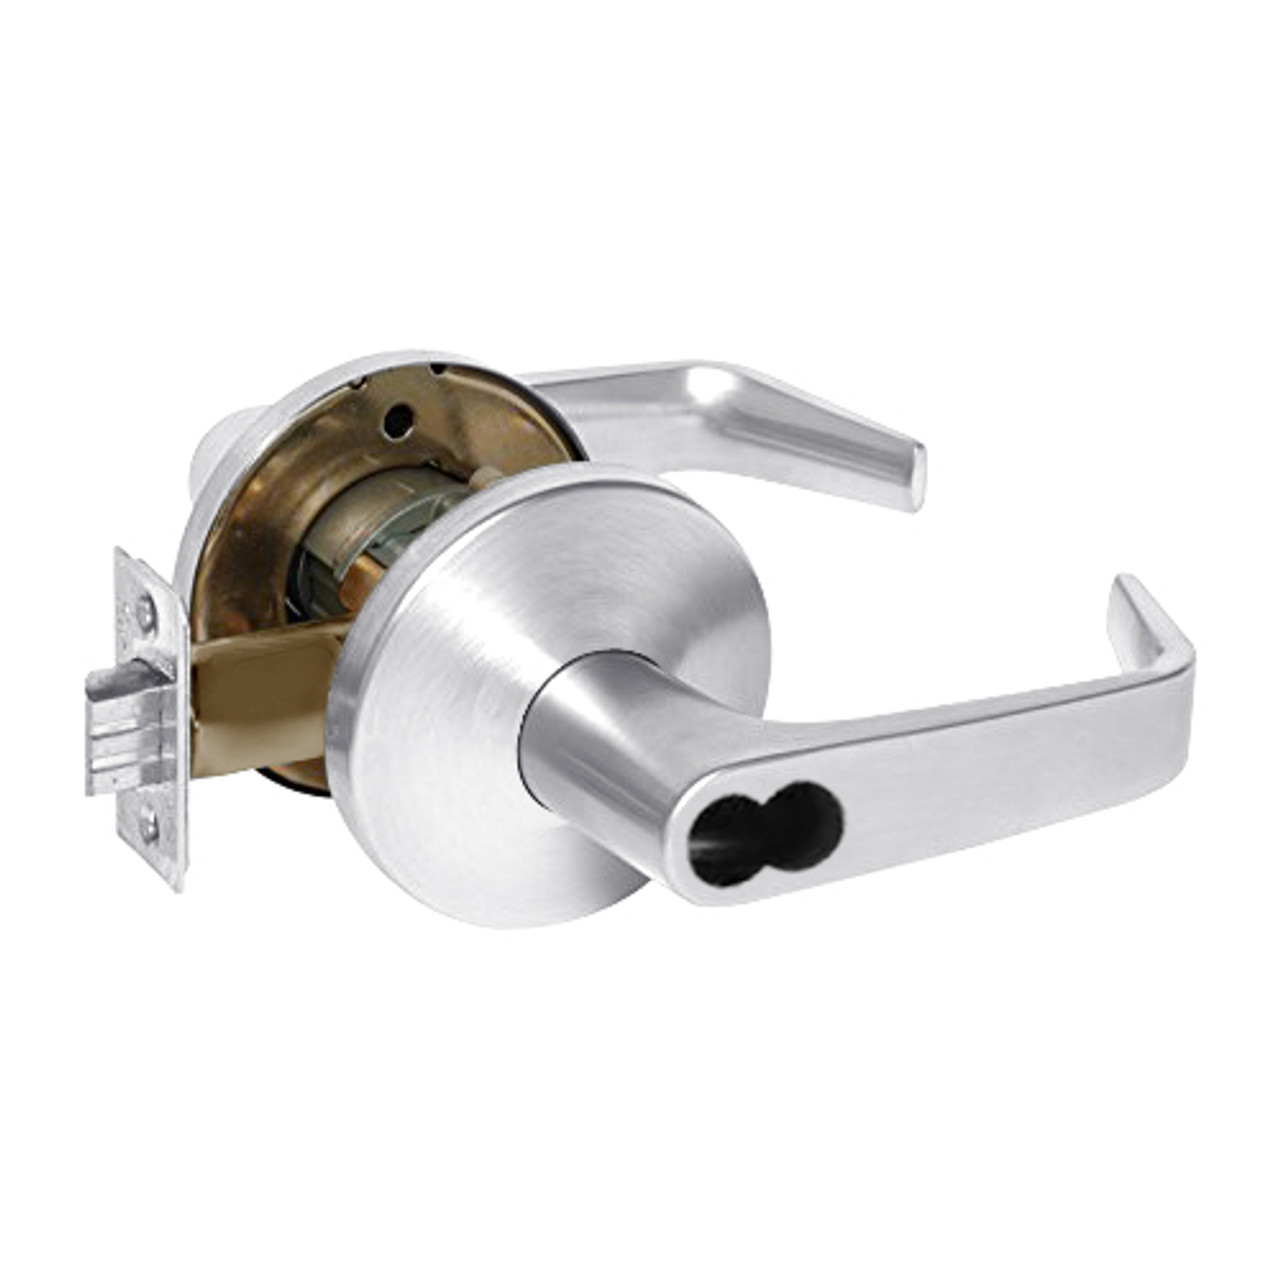 9K37YR15LSTK625LM Best 9K Series Special Function Cylindrical Lever Locks with Contour Angle with Return Lever Design Accept 7 Pin Best Core in Bright Chrome